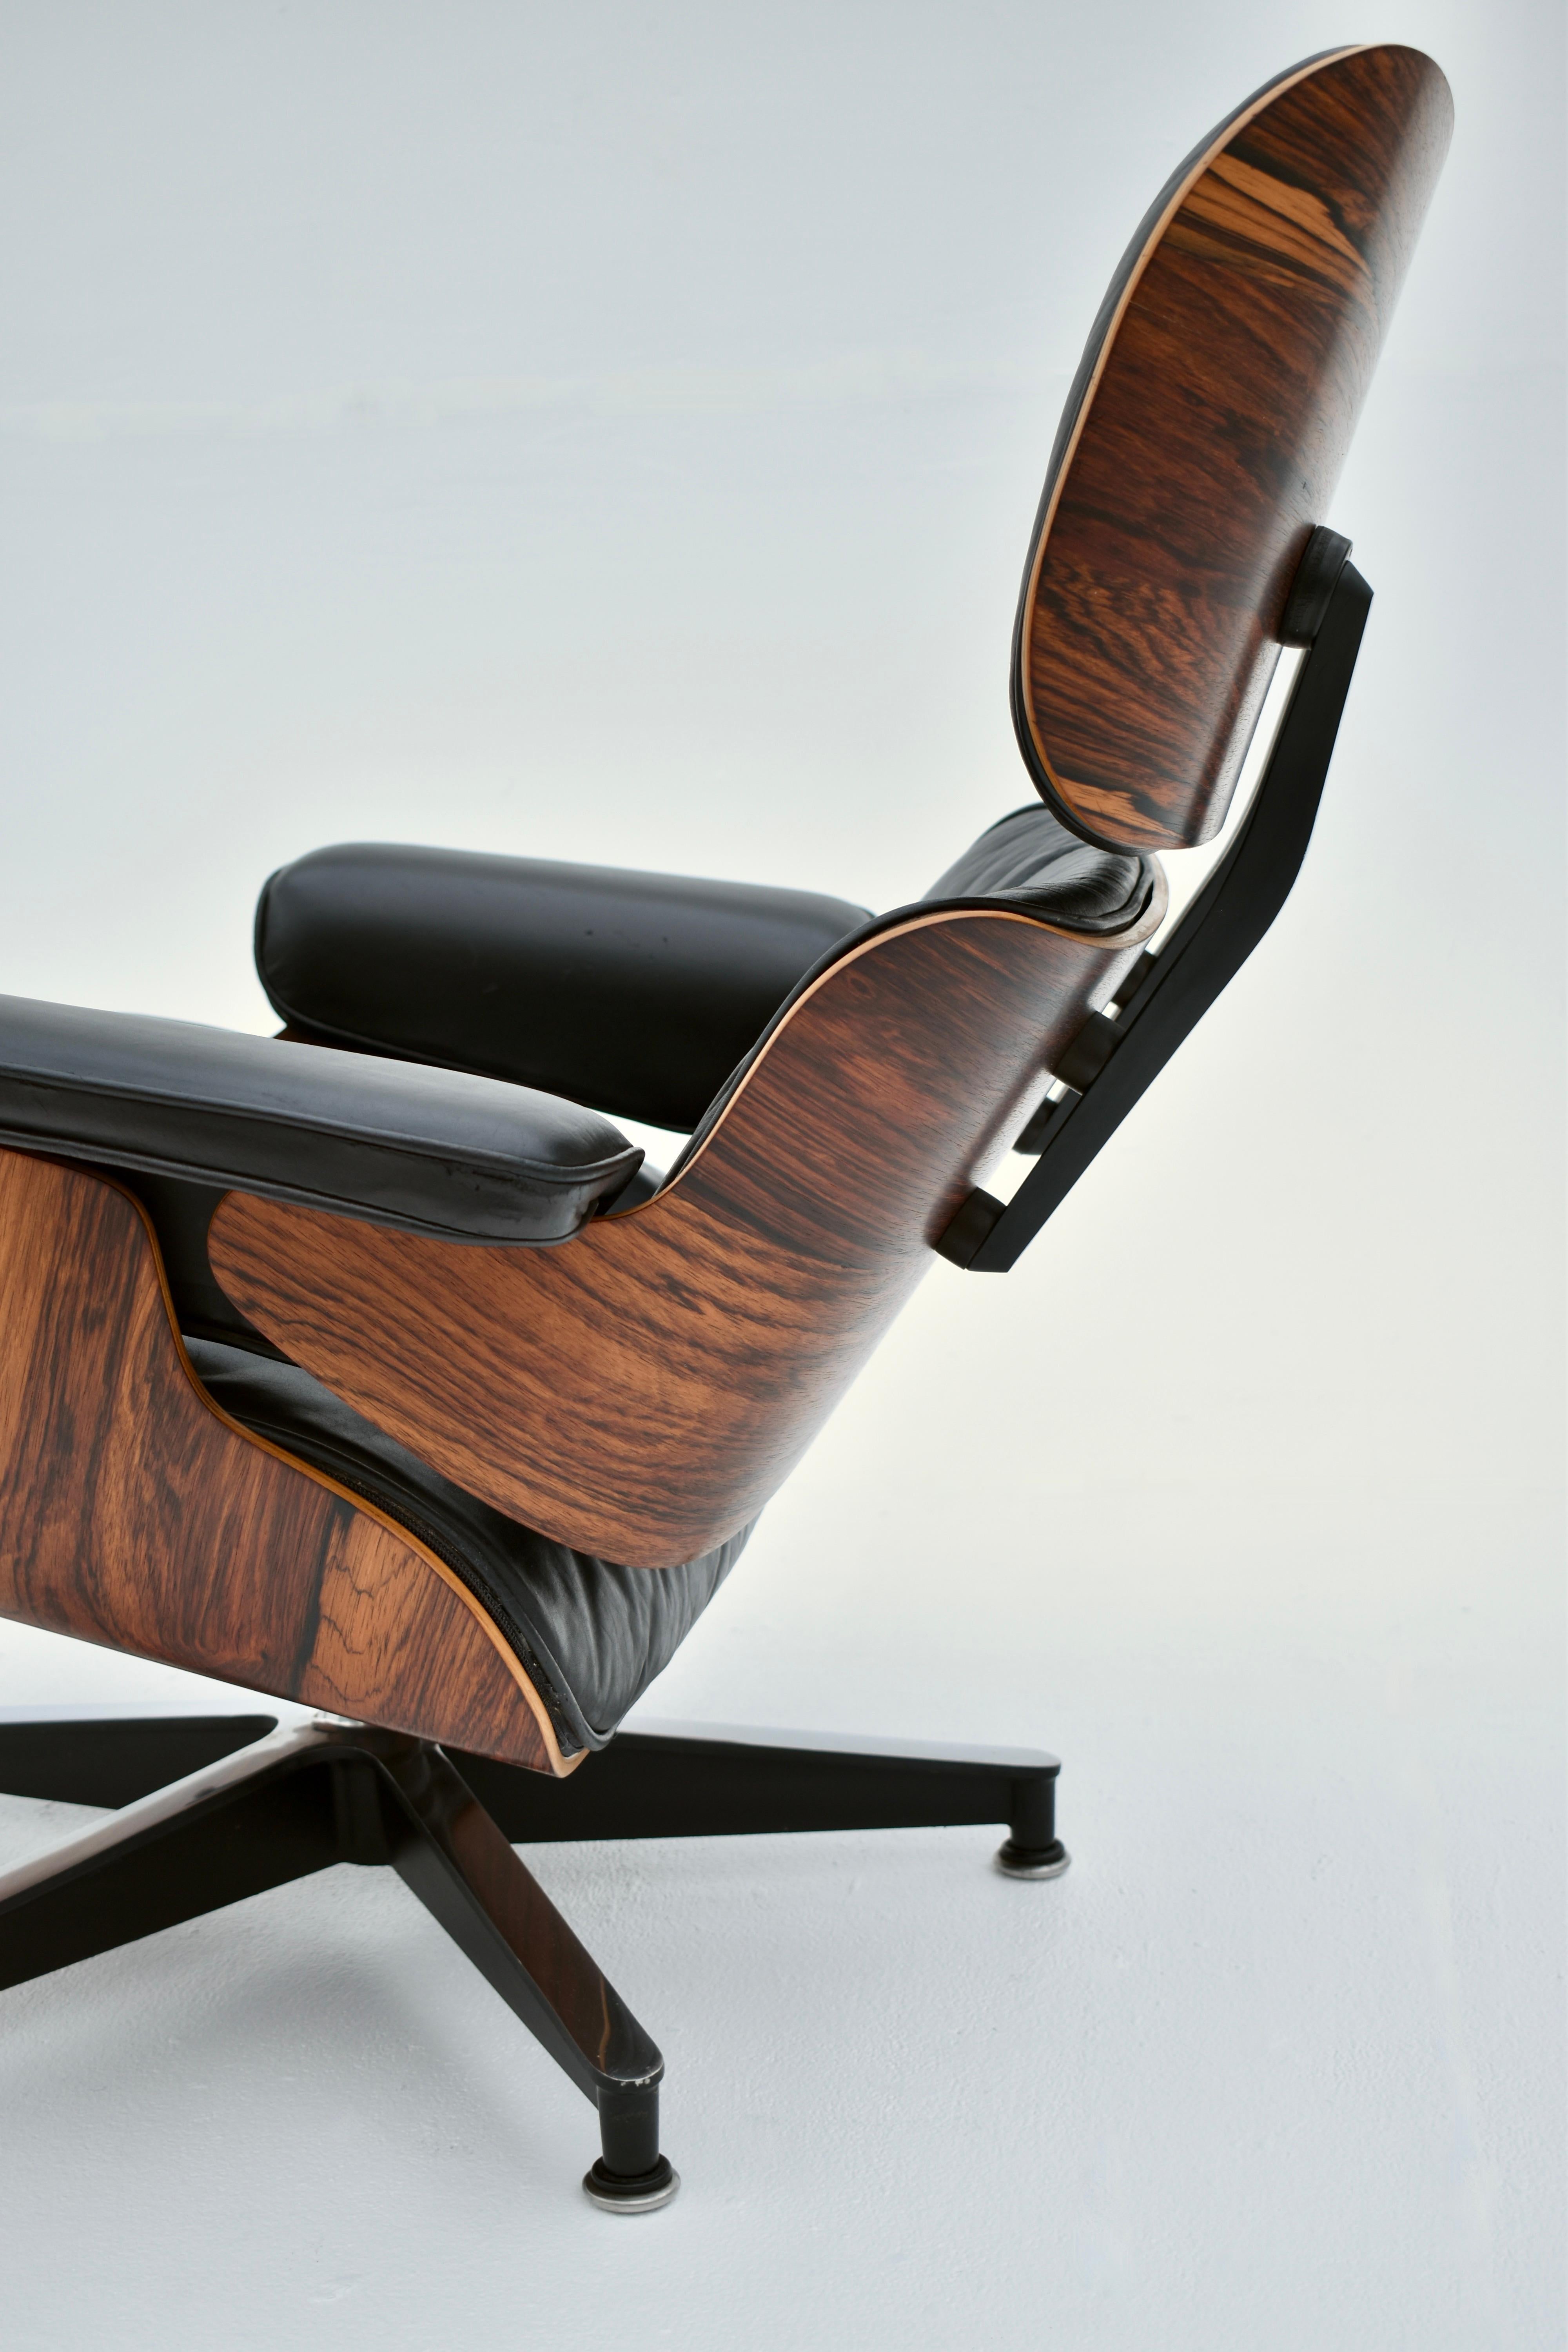 British Original 1960's Production Eames Lounge Chair For Herman Miller